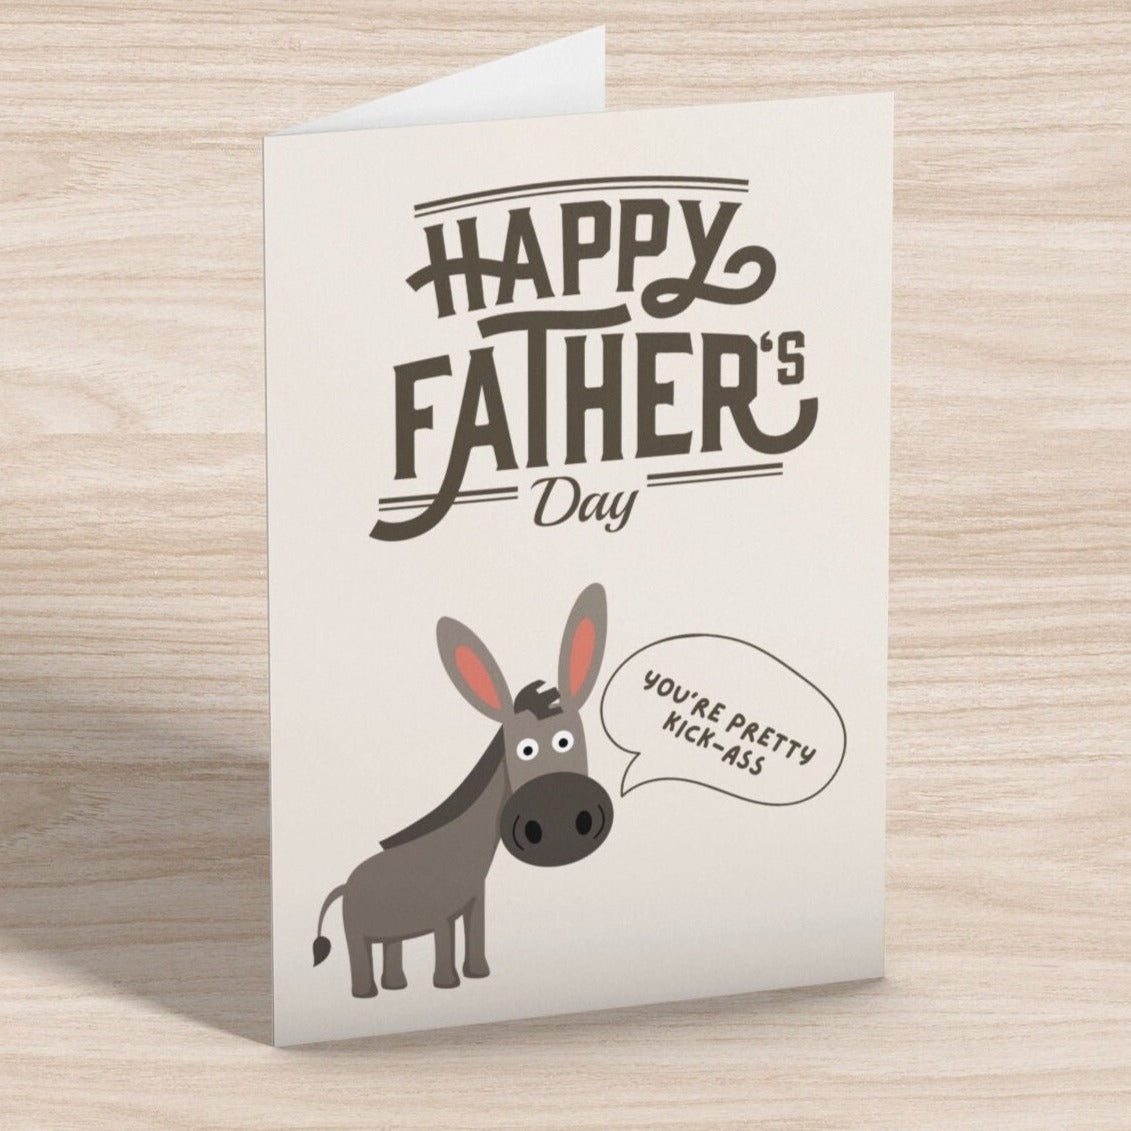 You're Pretty Kick Ass | Funny Father’s Day Card | For Dad or Grandpa | Card for Him